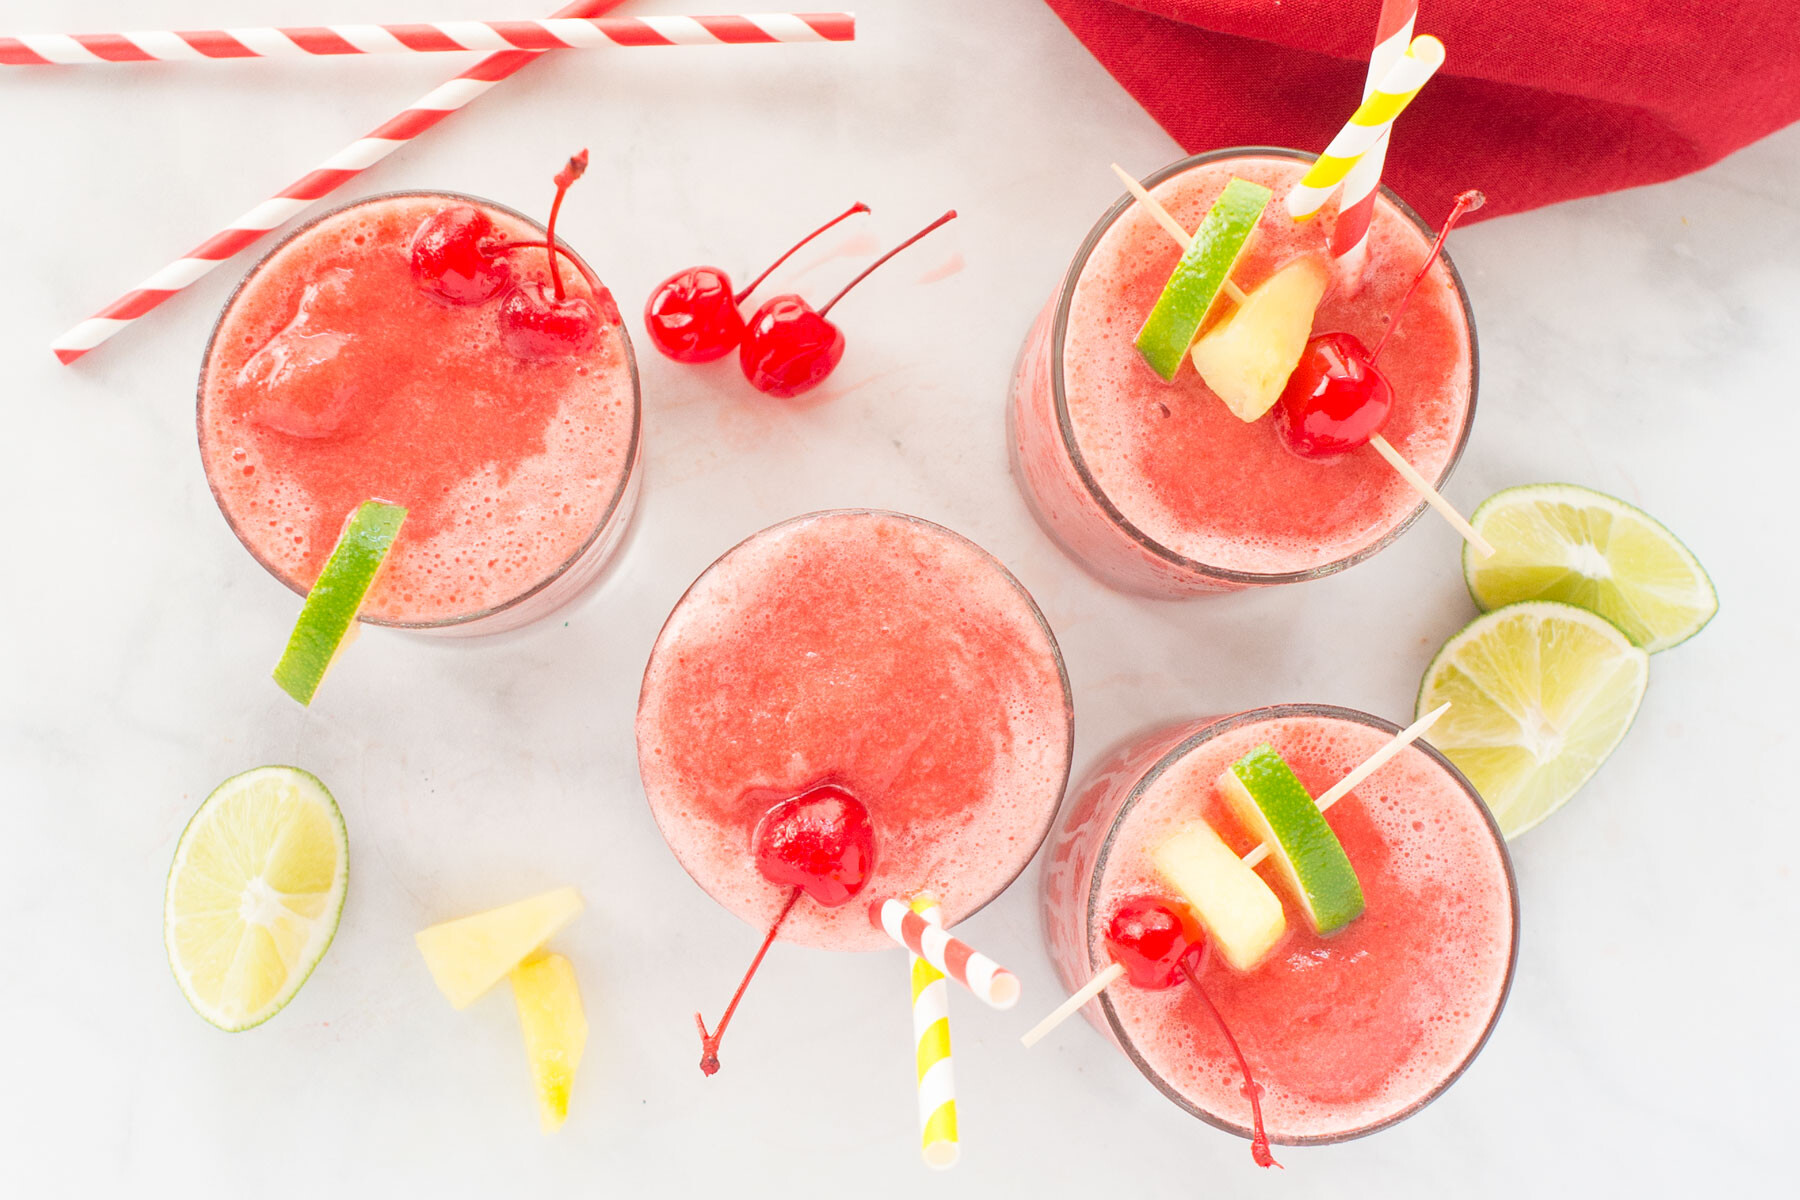 These kid friendly freezer meals are perfect with these 4 glasses of slush with cherries, limes and striped straws.